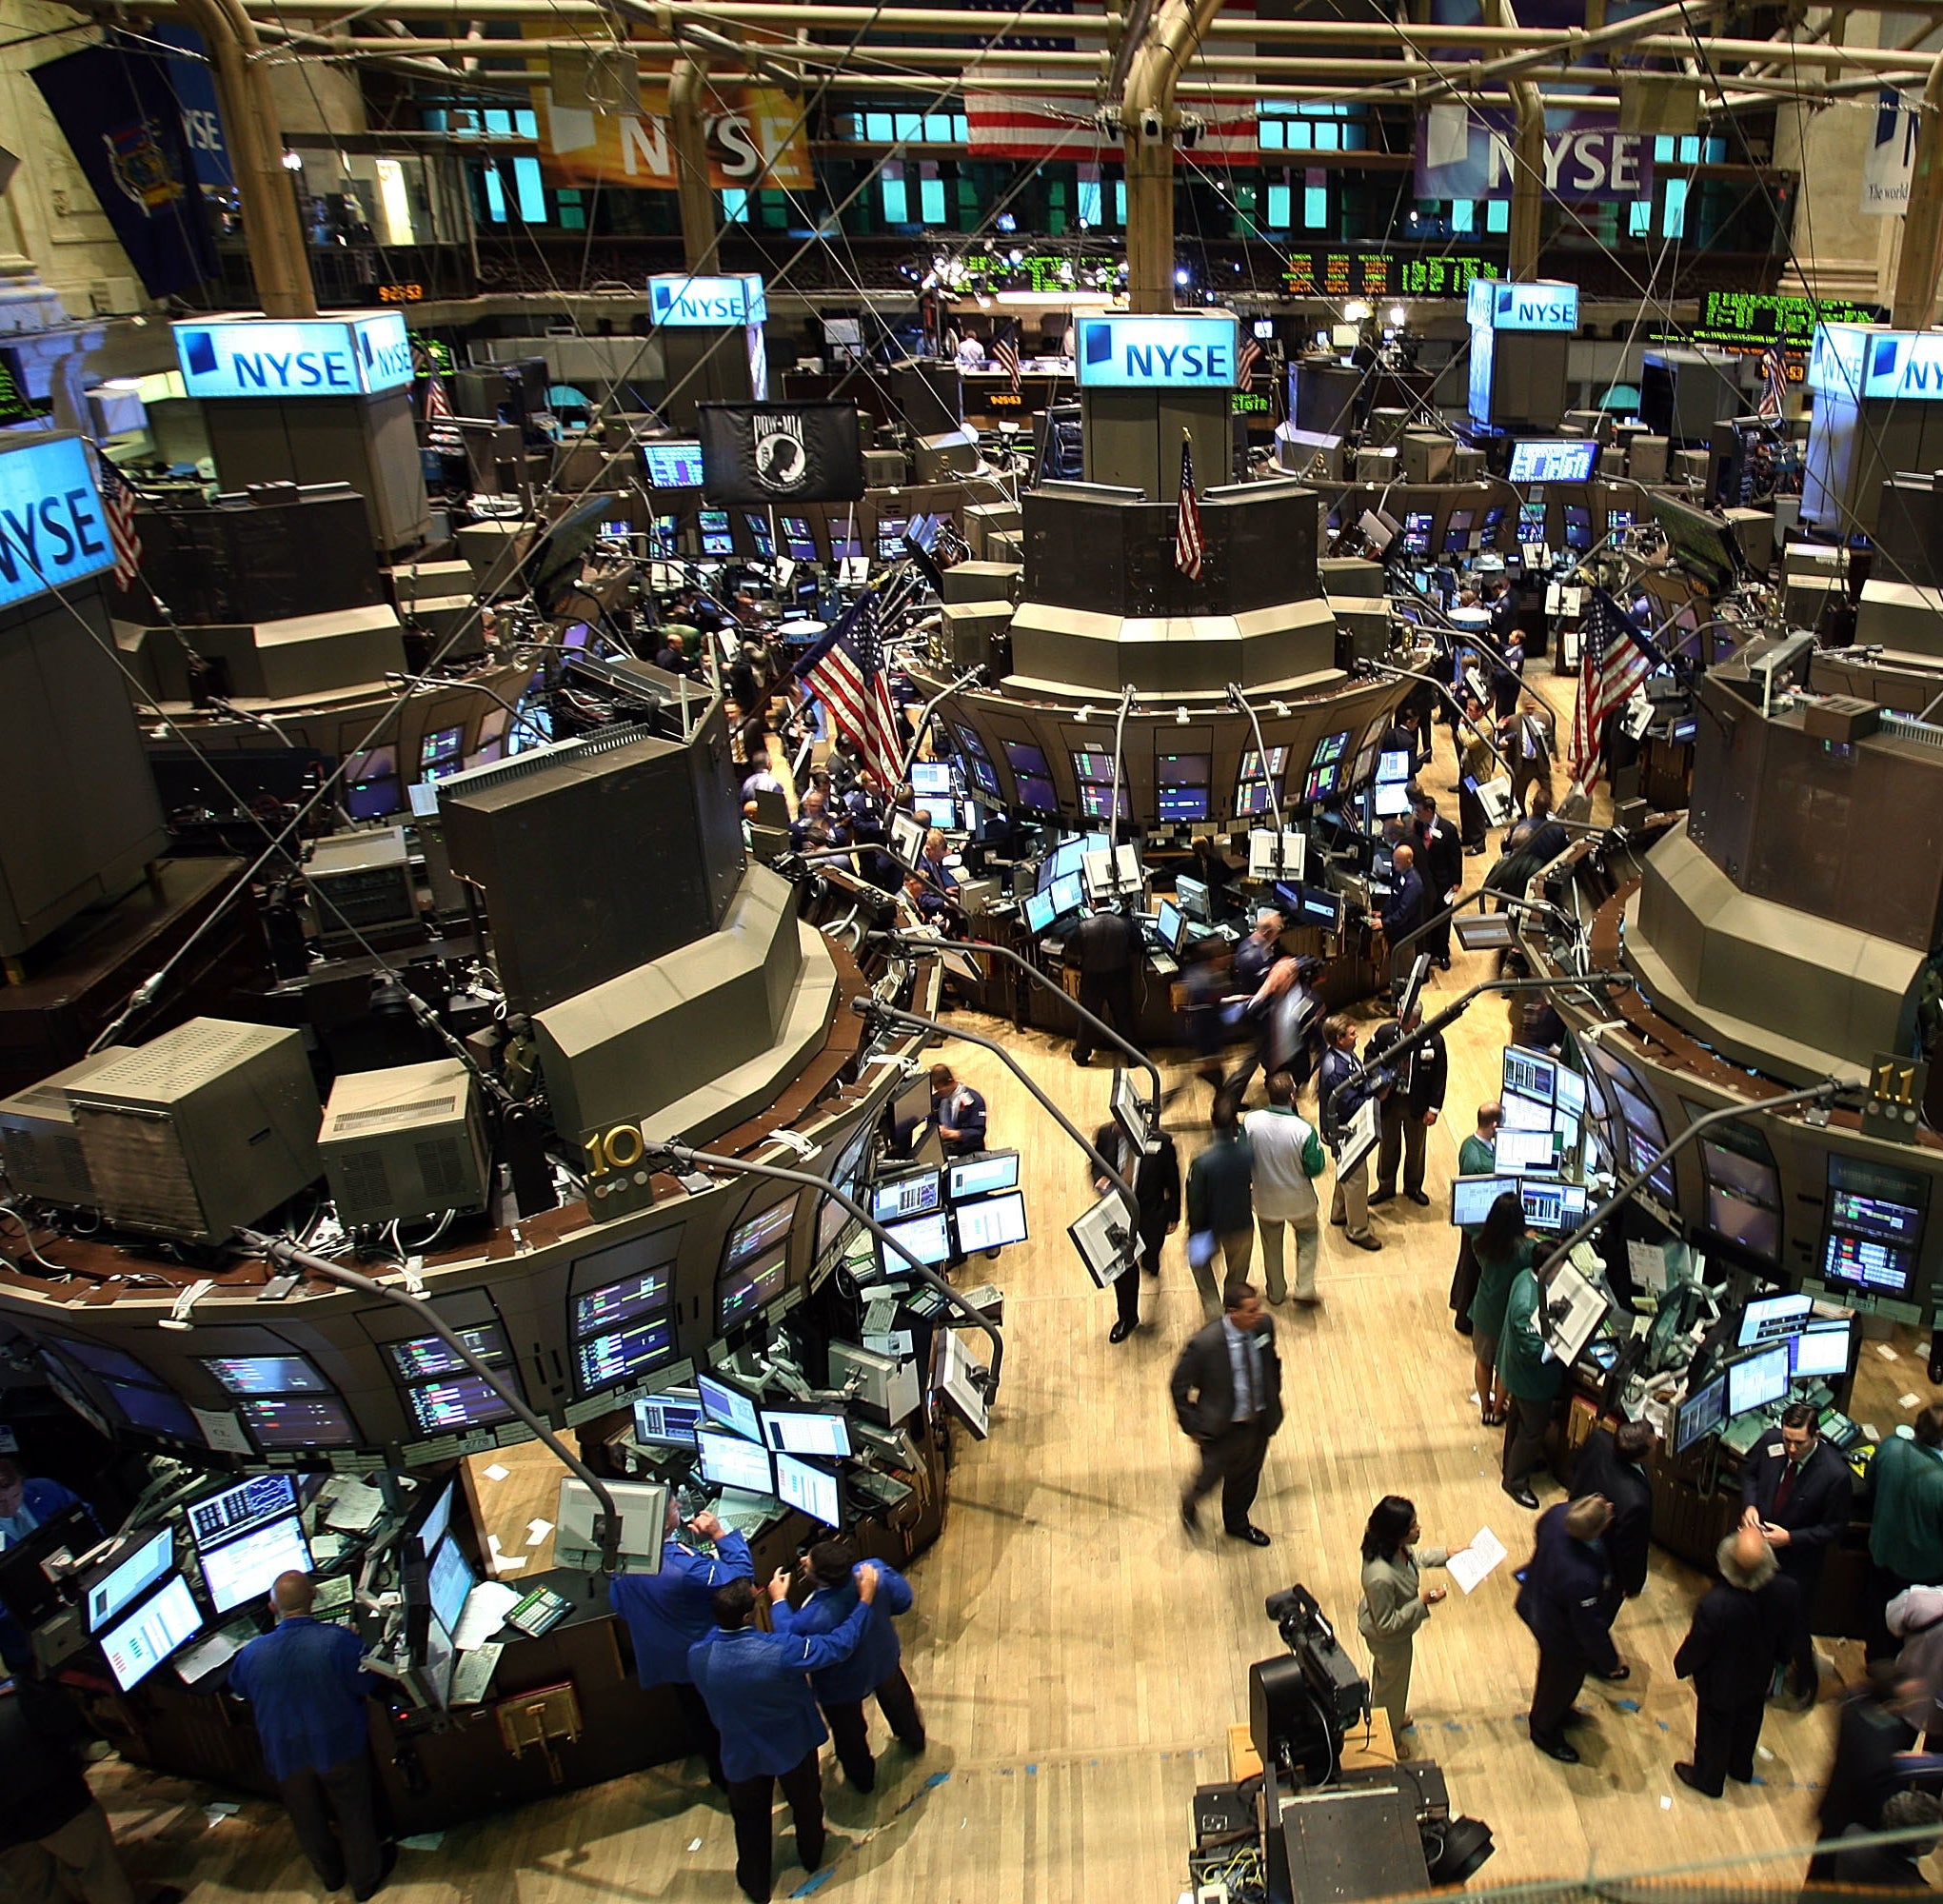 New York Stock Exchange in 2008 after the market crashed